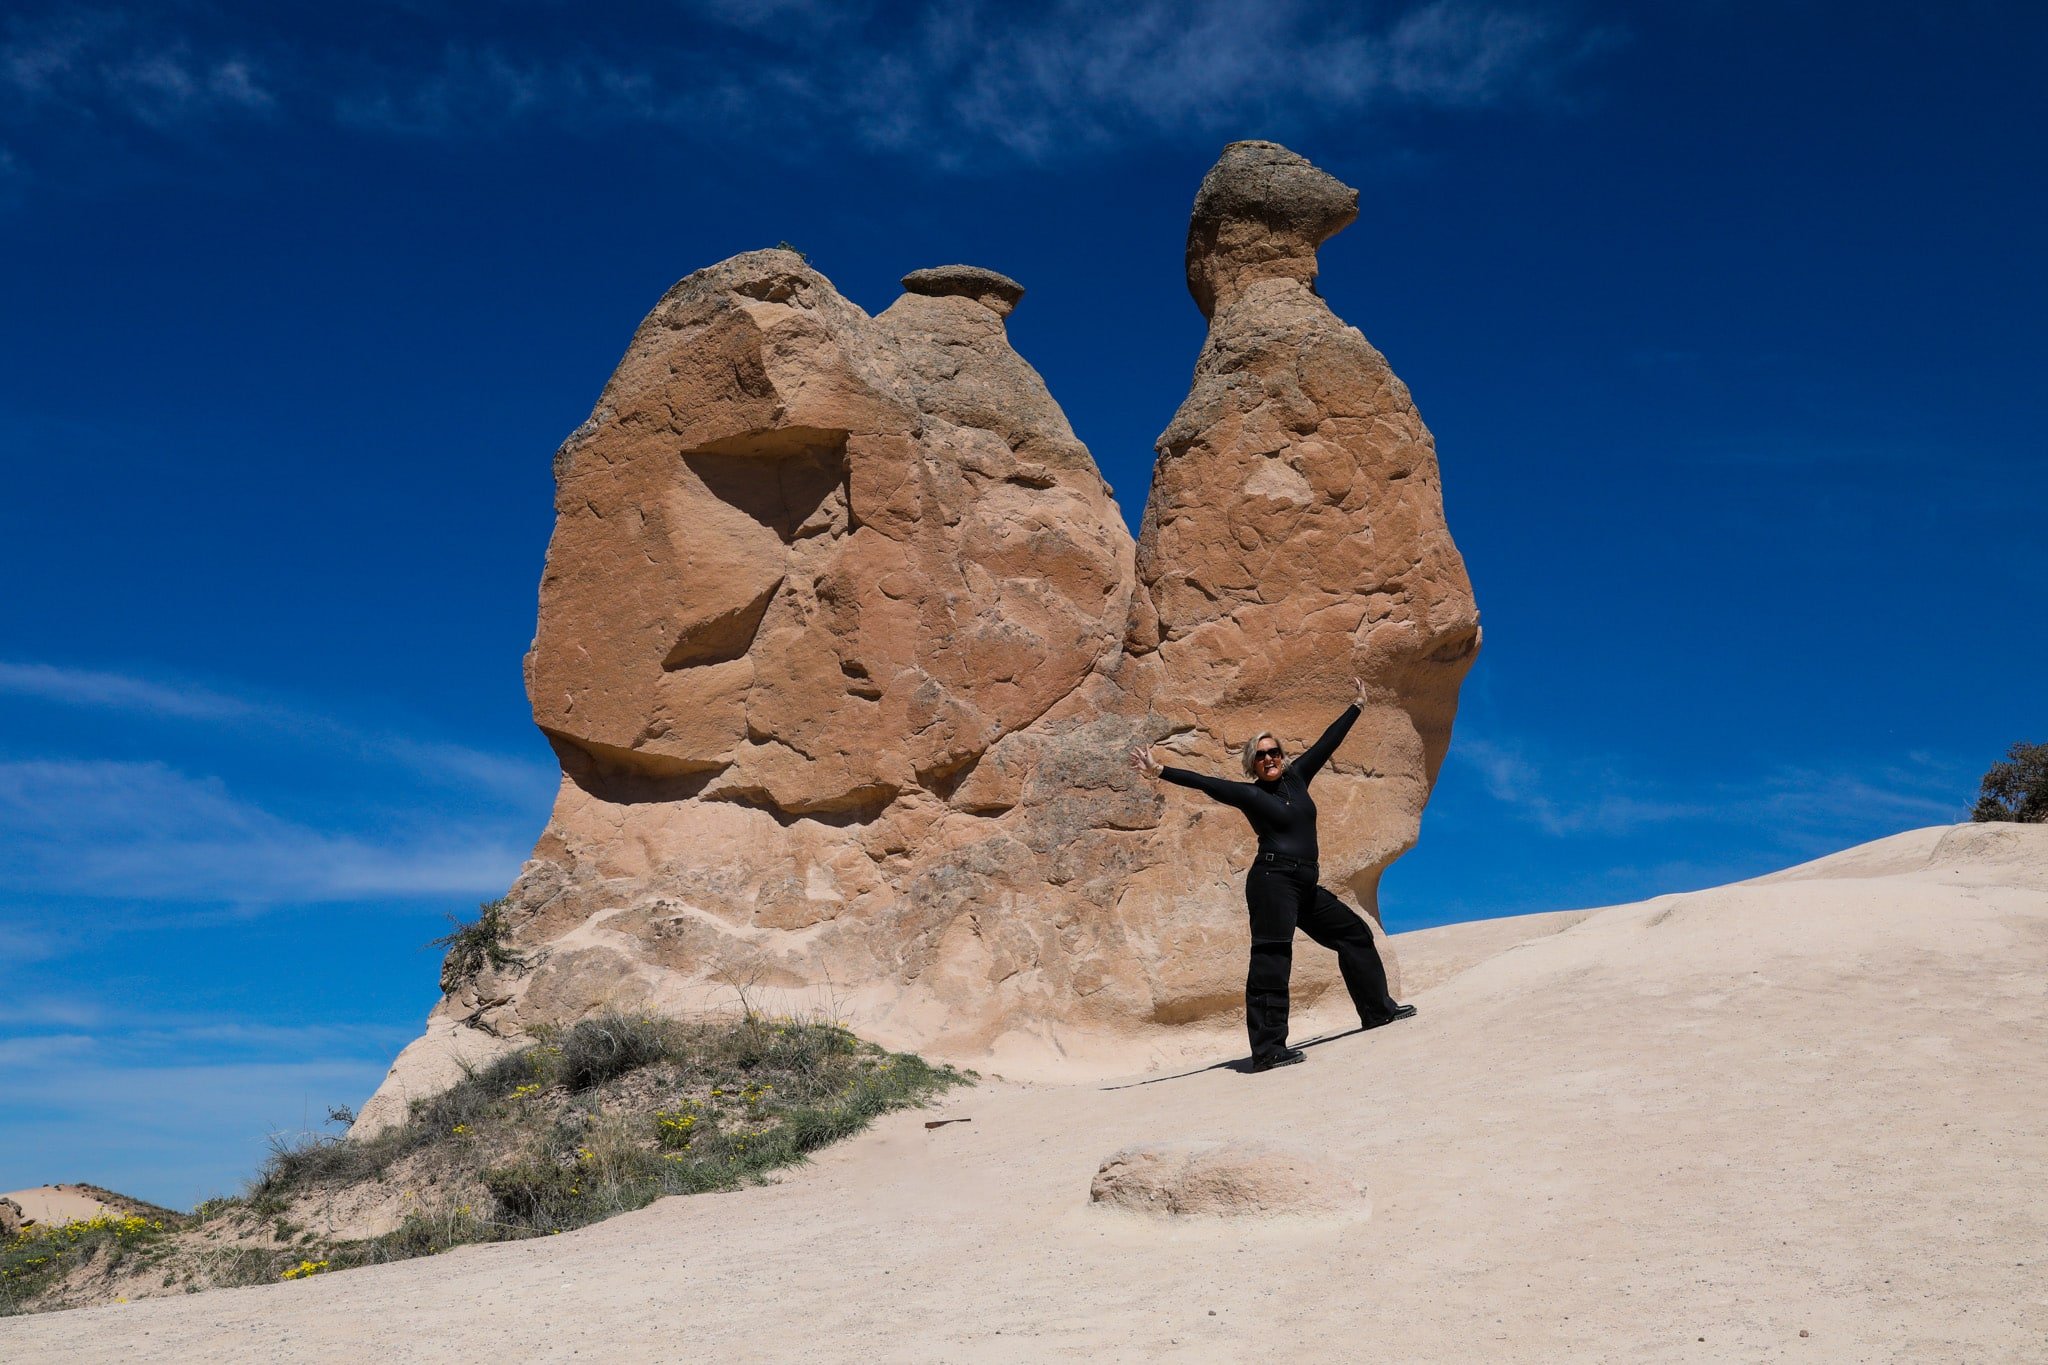 SJ posing with outstretched arms in front of unique, large rock formations under a clear blue sky during a Cappadocia Itinerary.